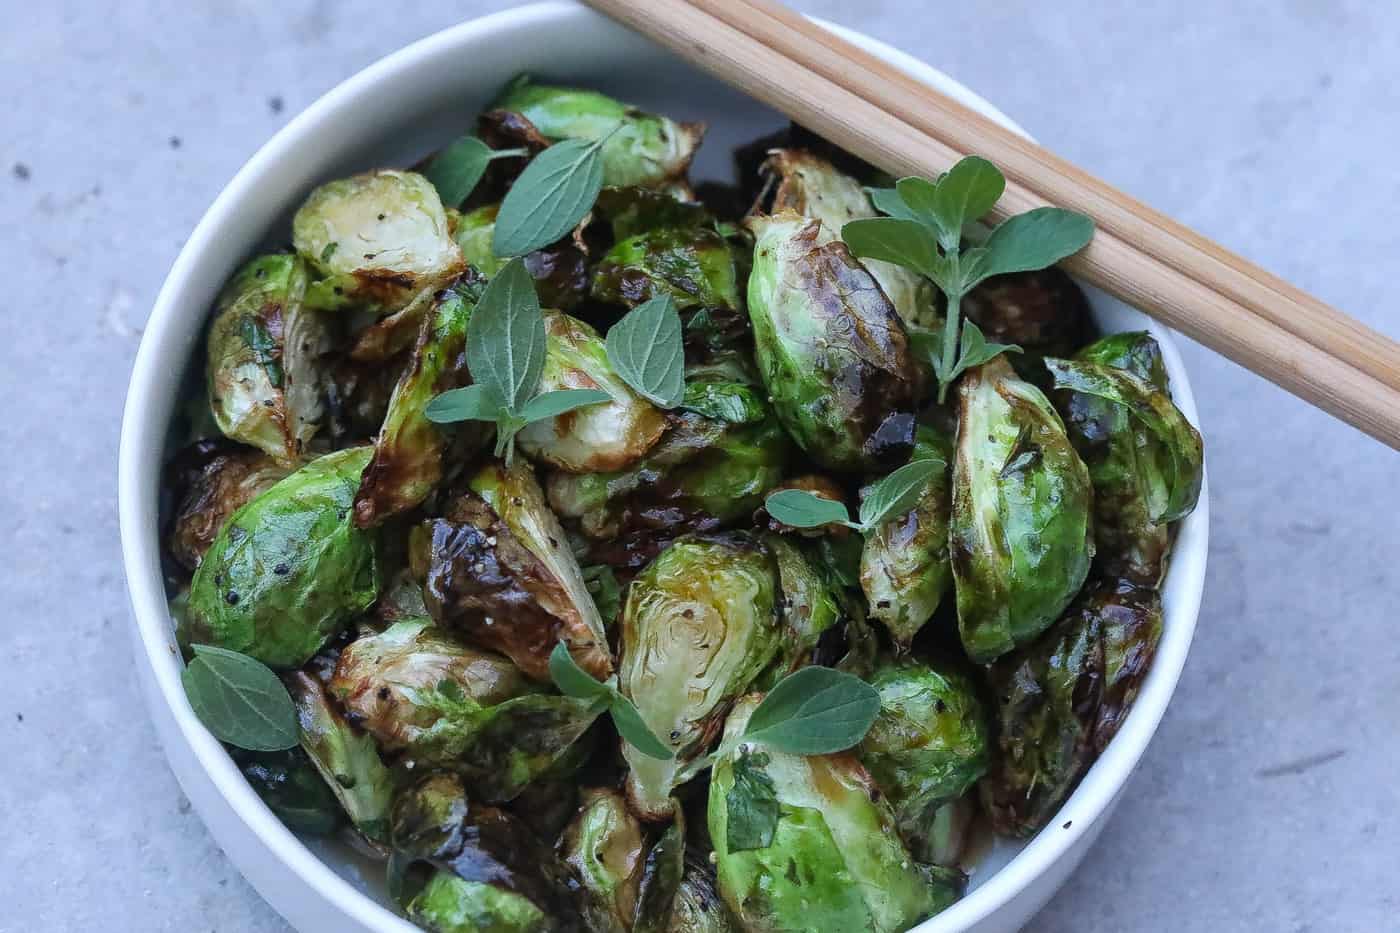 fried brussel sprouts in a bowl with chopsticks